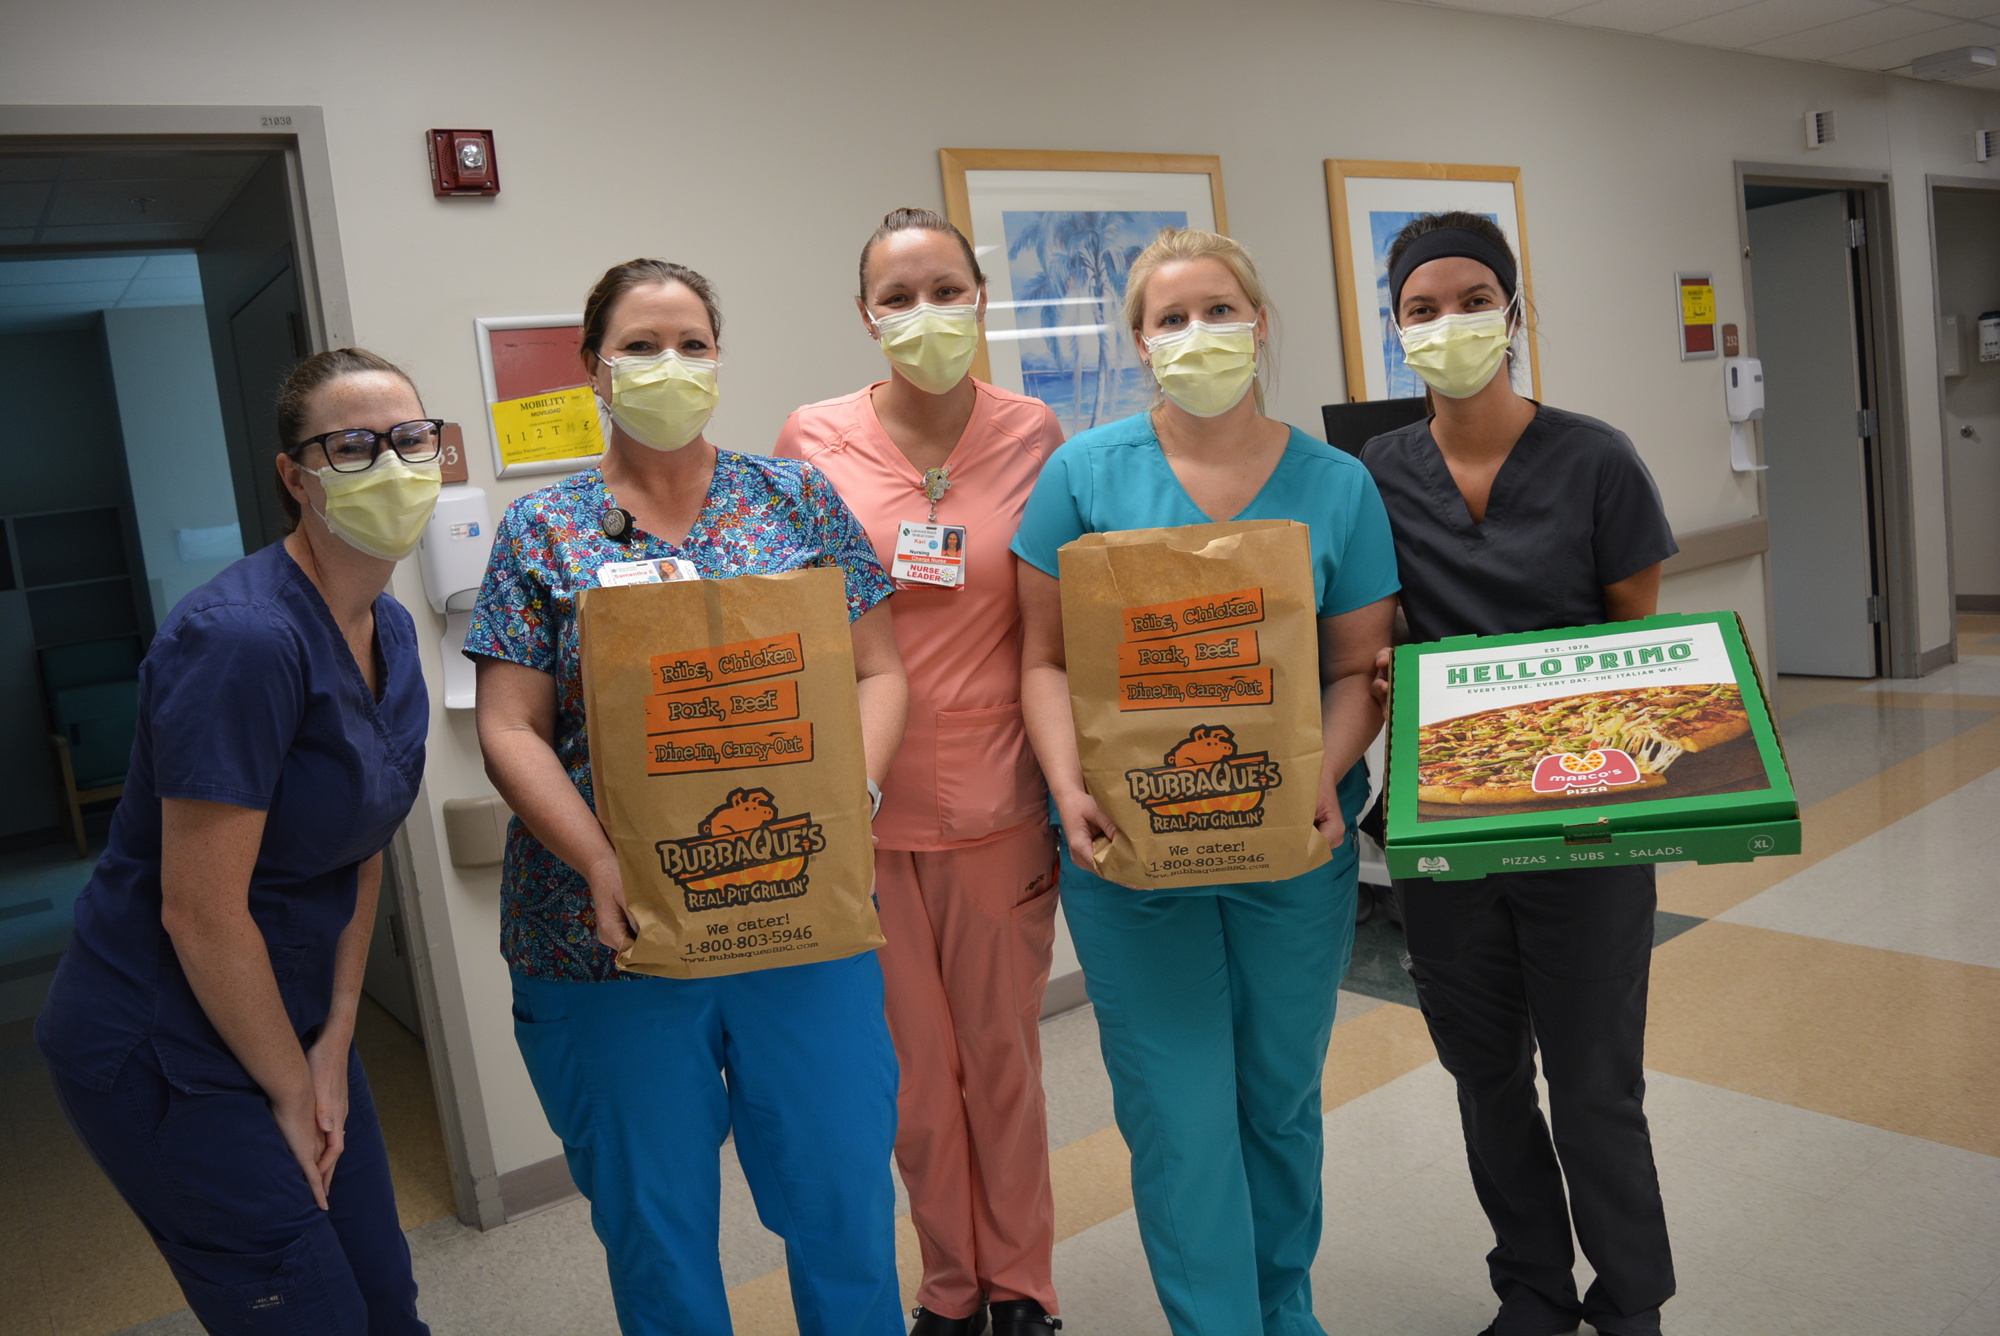 Medical surgical floor nurses Sarah Curtis, Samantha Edelman, Kari Jones, Dusty Carpenter and Noelle Clark happily take donated lunches of pulled pork sandwiches and pizza.